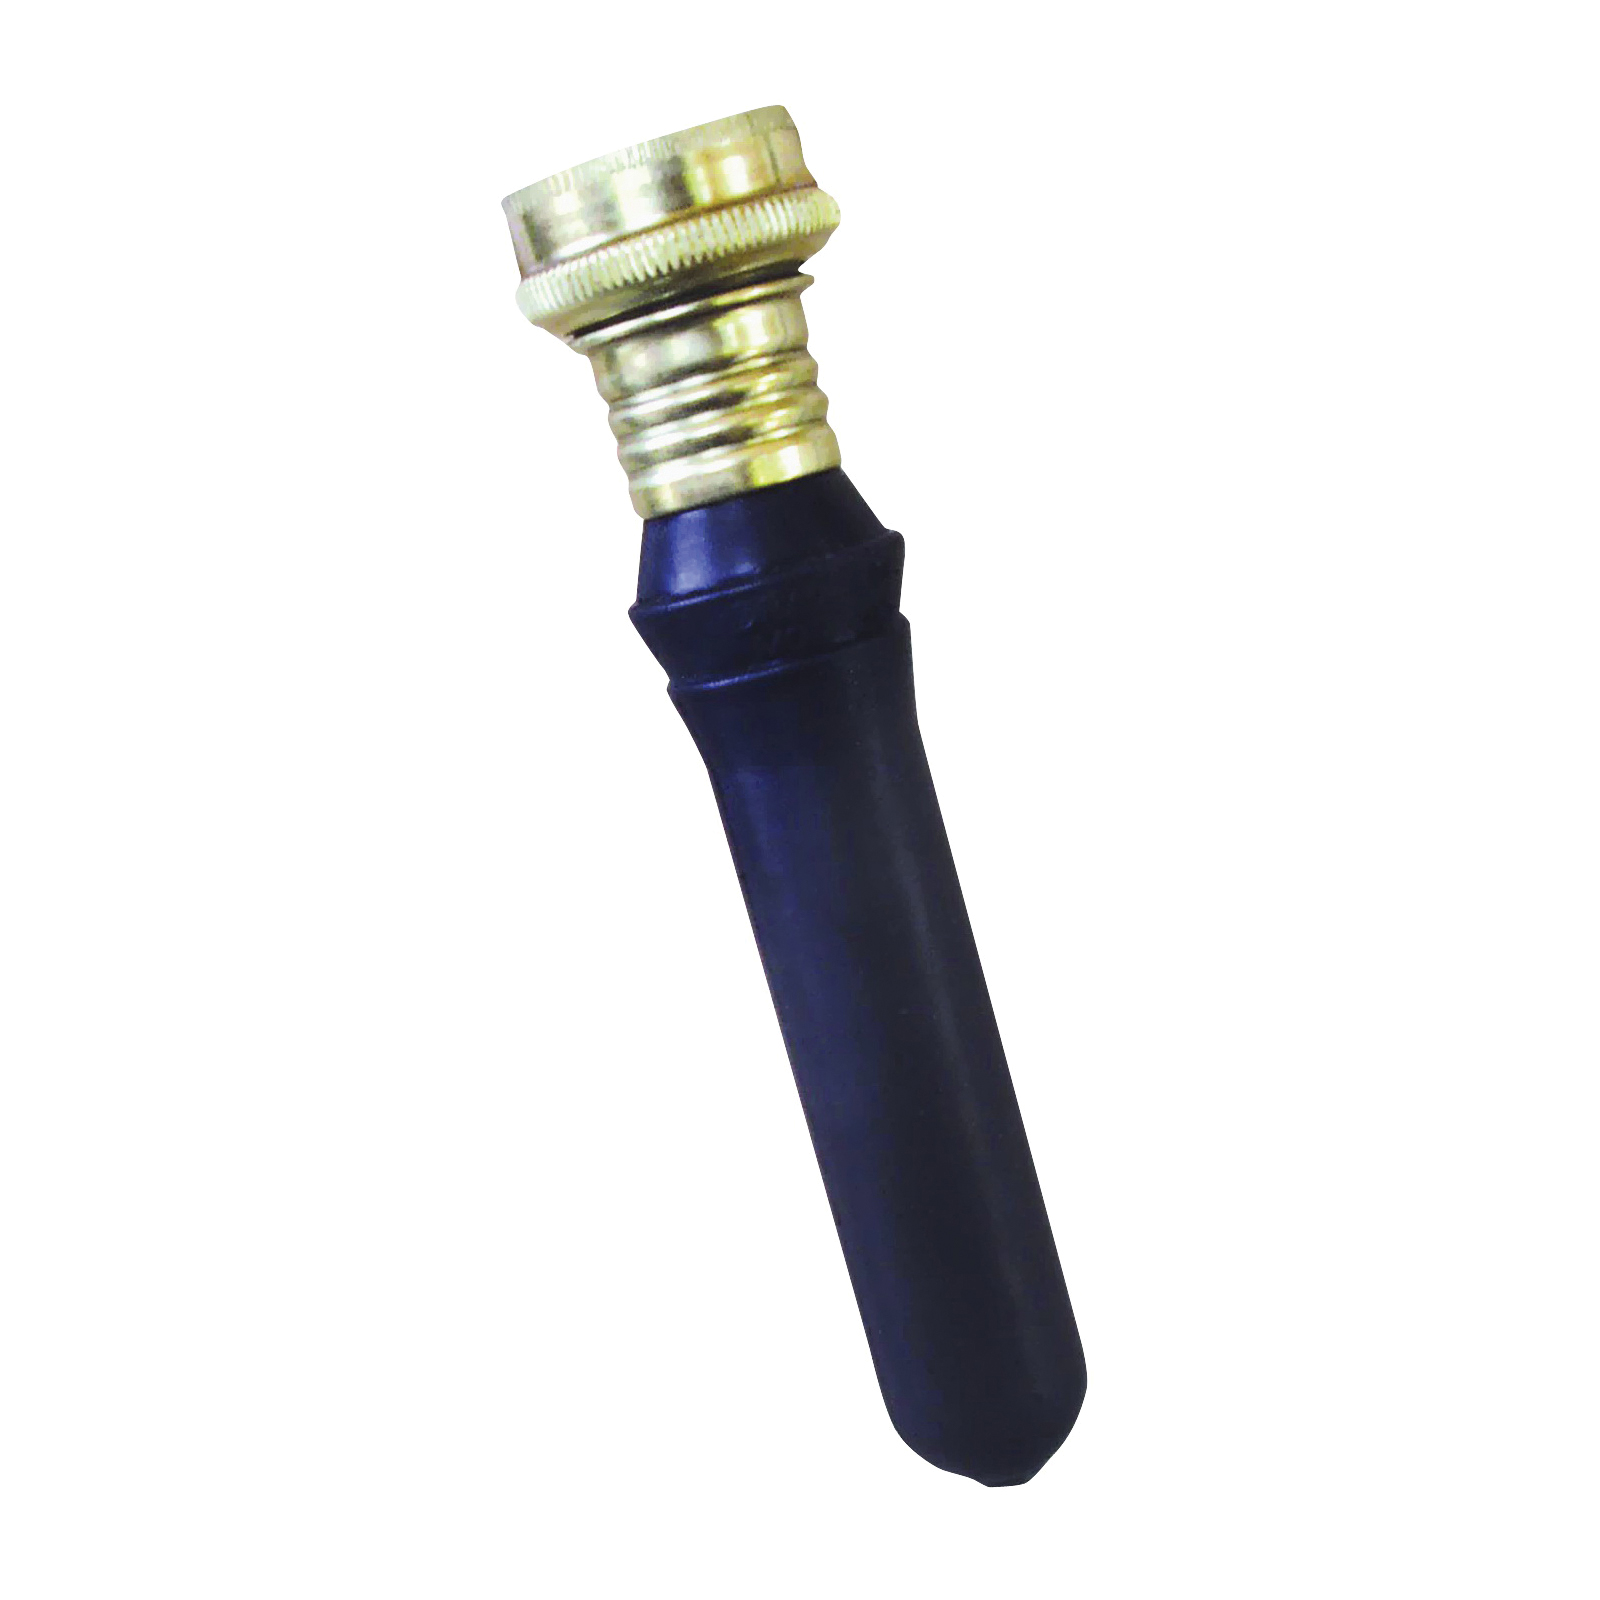 345 Drain Opener/Cleaner, 50 to 80 psi Pressure, 3/4 to 1-1/2 in Drain